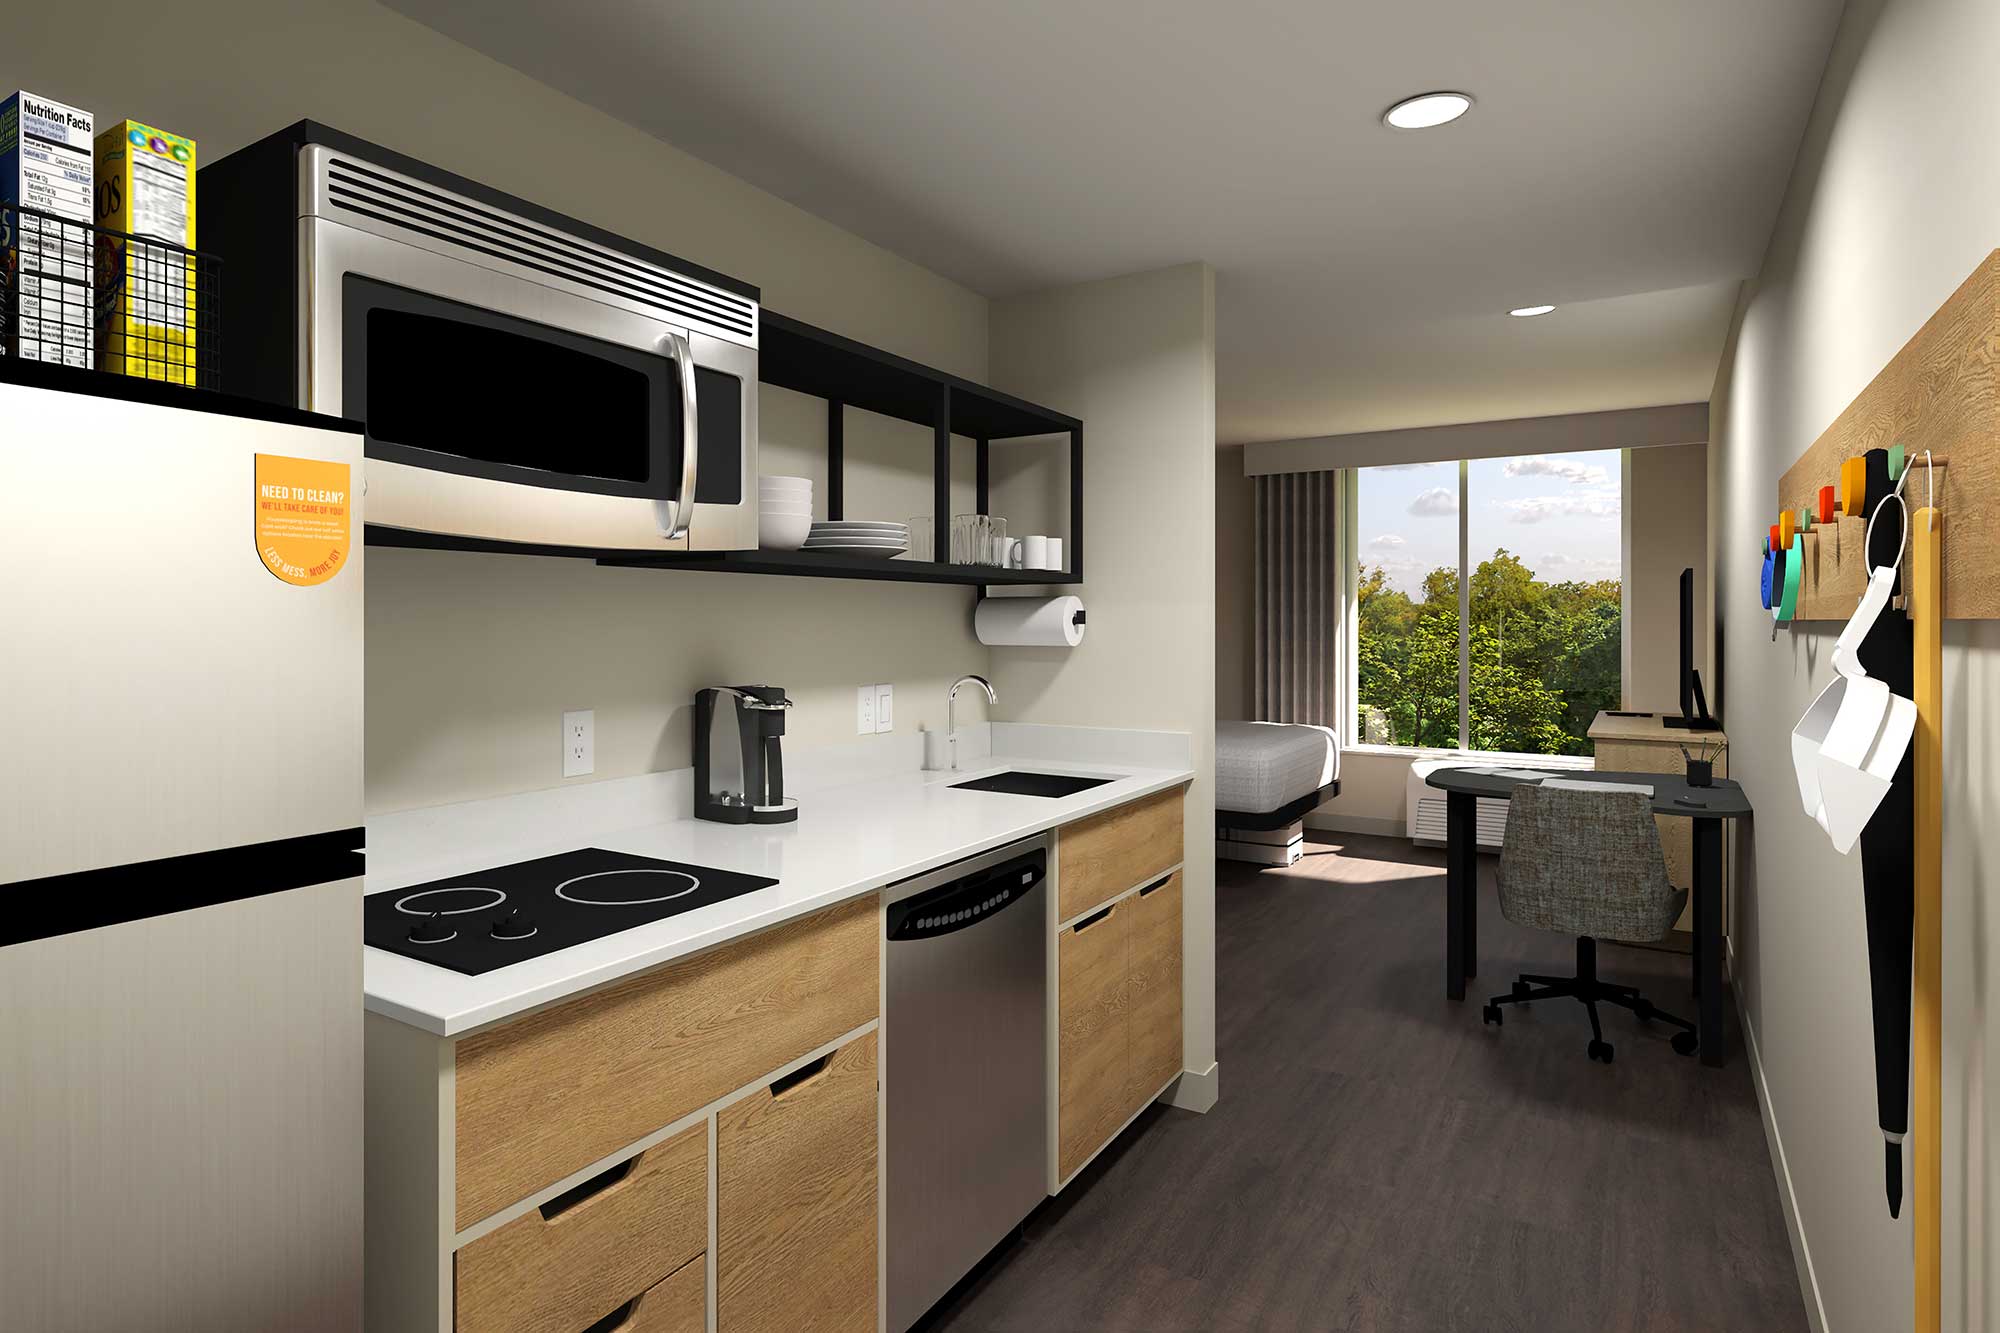 A conceptualized image of a room in Hilton's new extended-stay brand. Source: Hilton